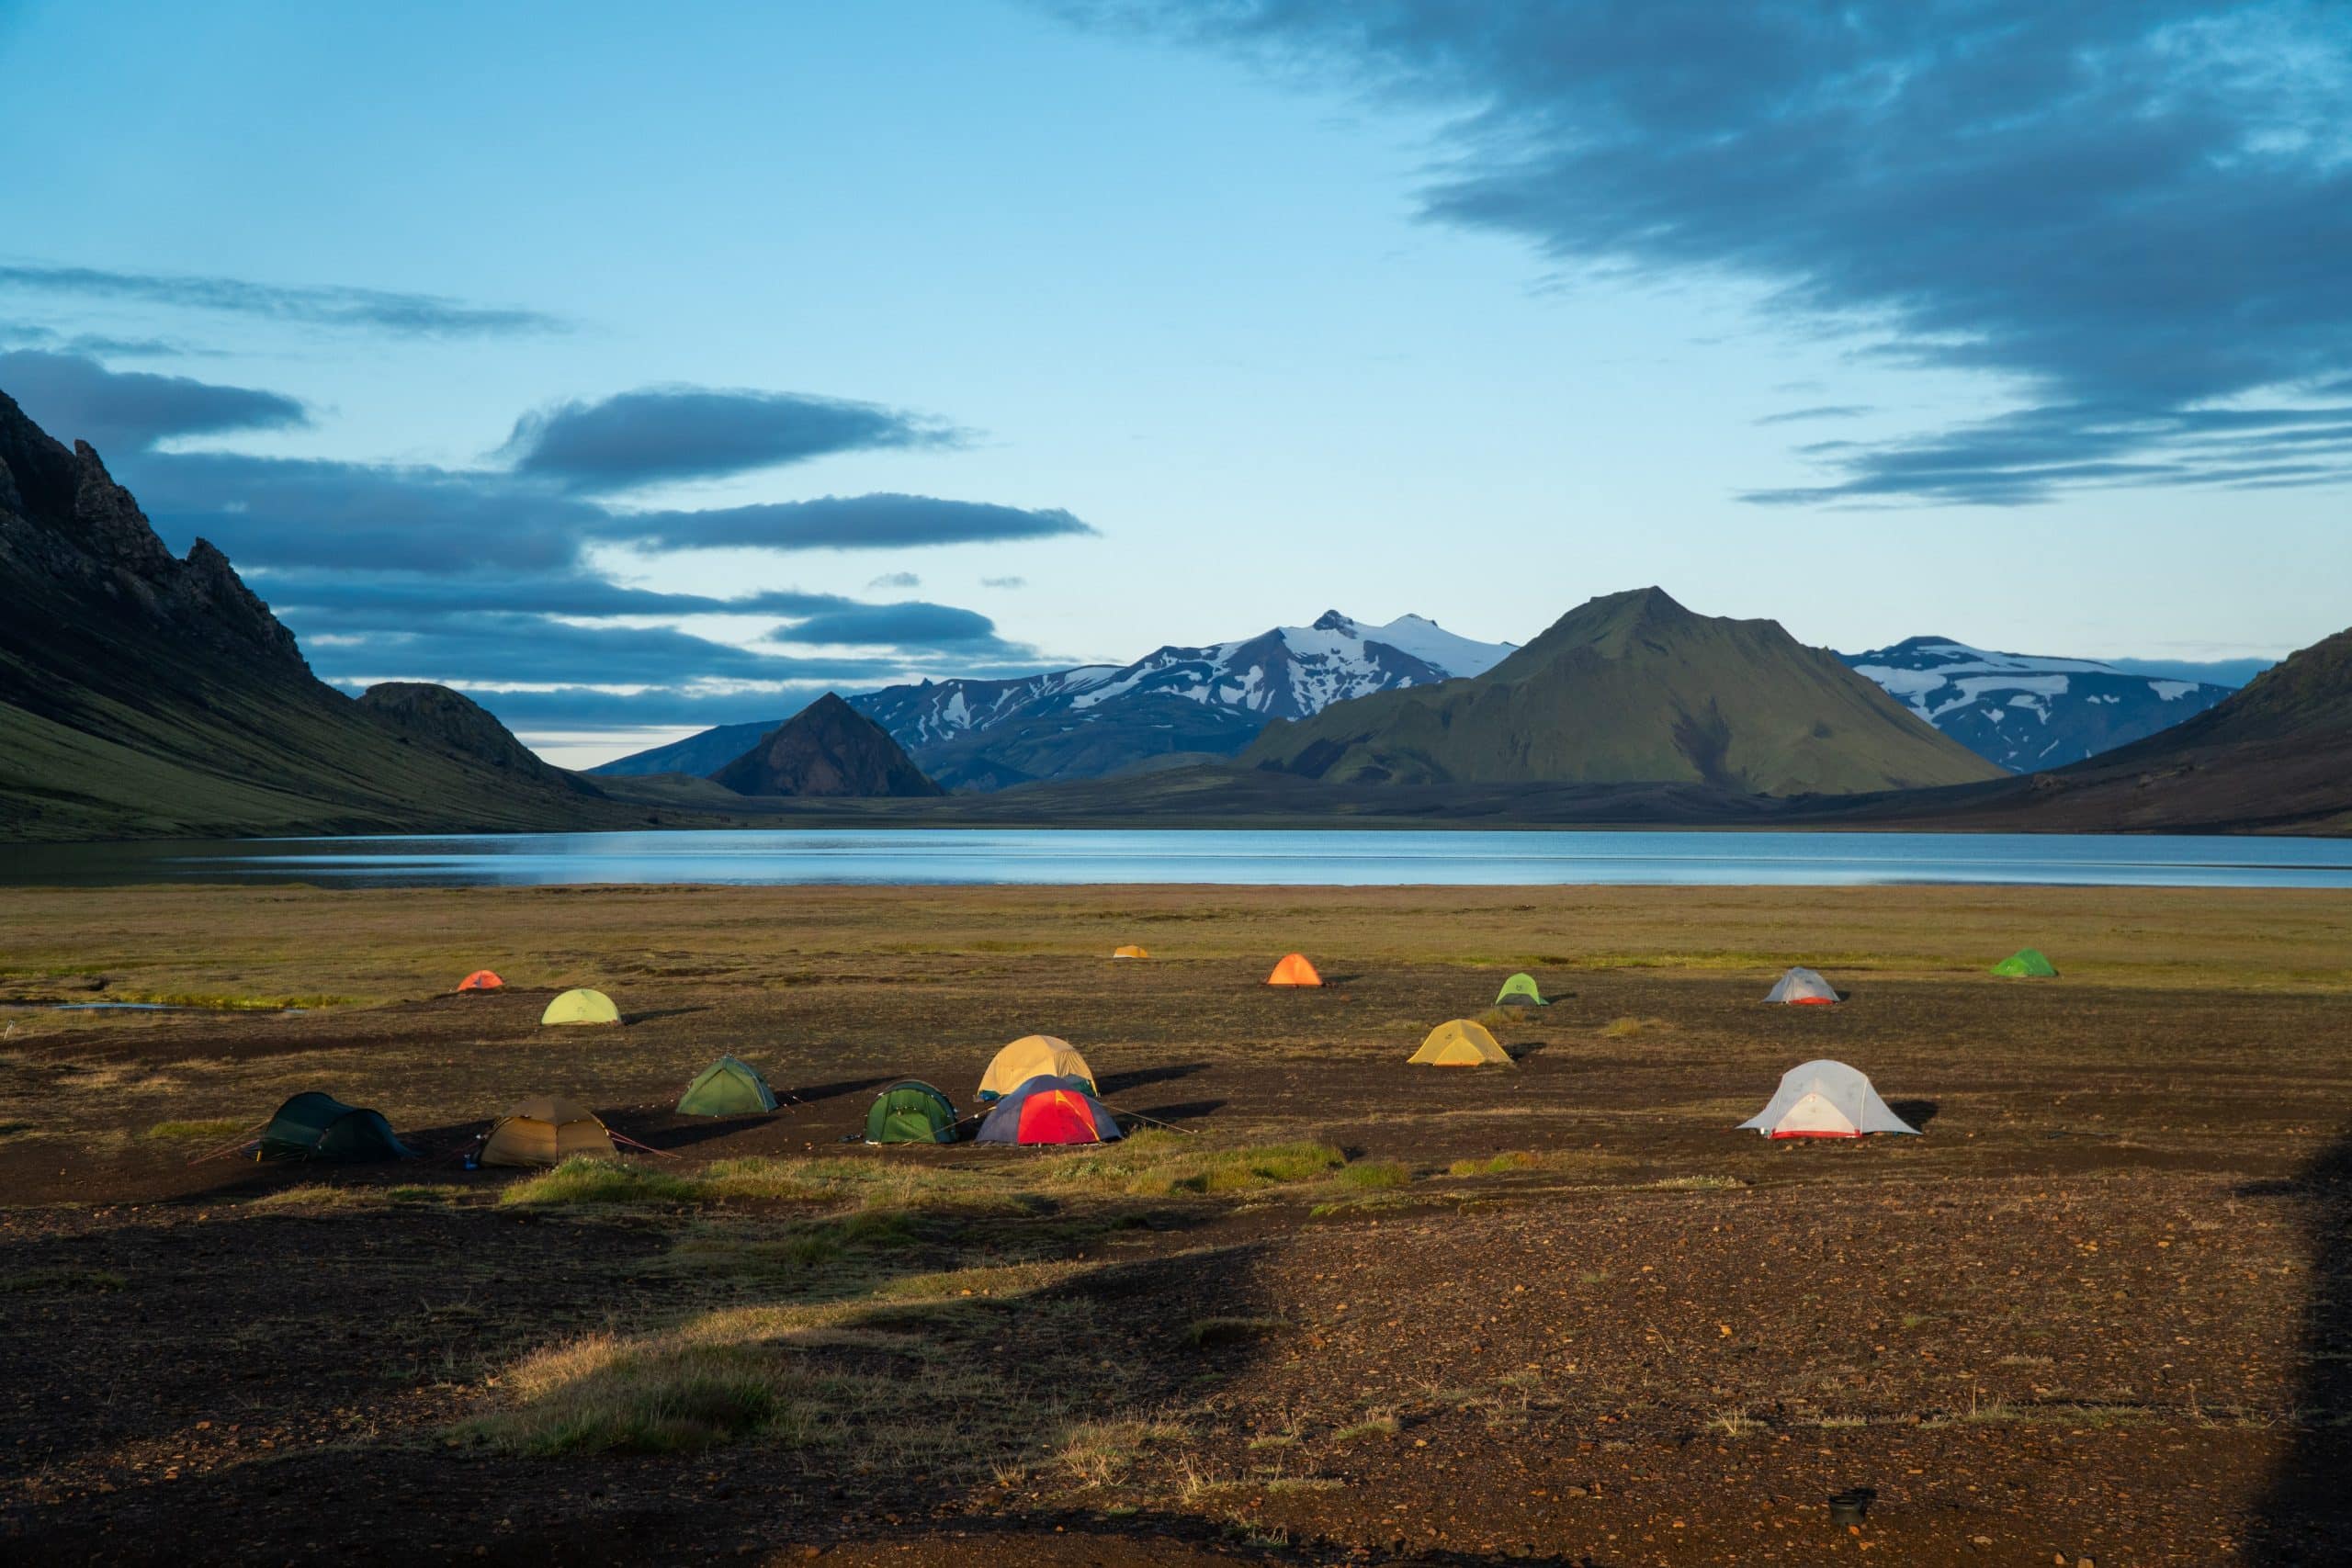 Tents at a campsite in the Icelandic Highlands, overlooking a lake.